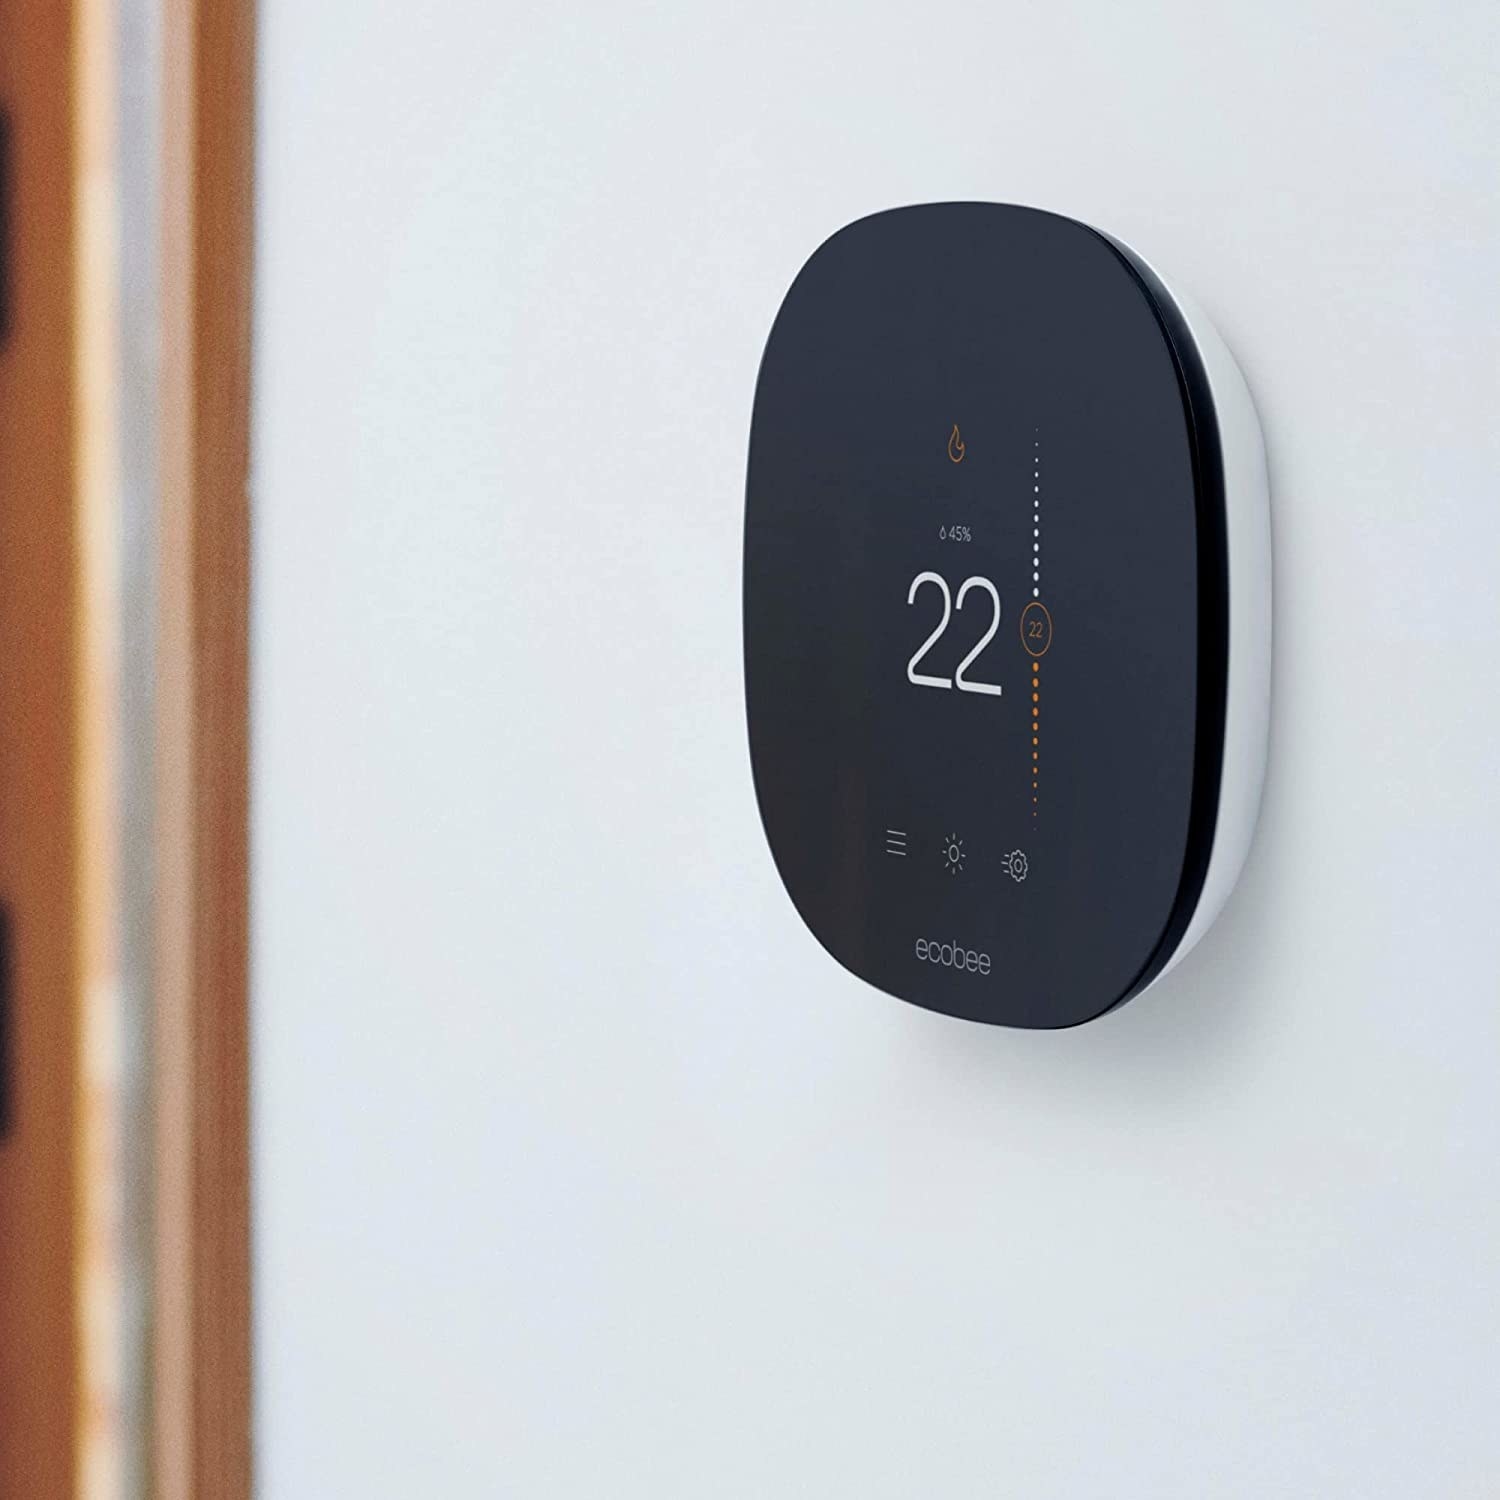 A sleek touchscreen smart thermostat on a wall in a home